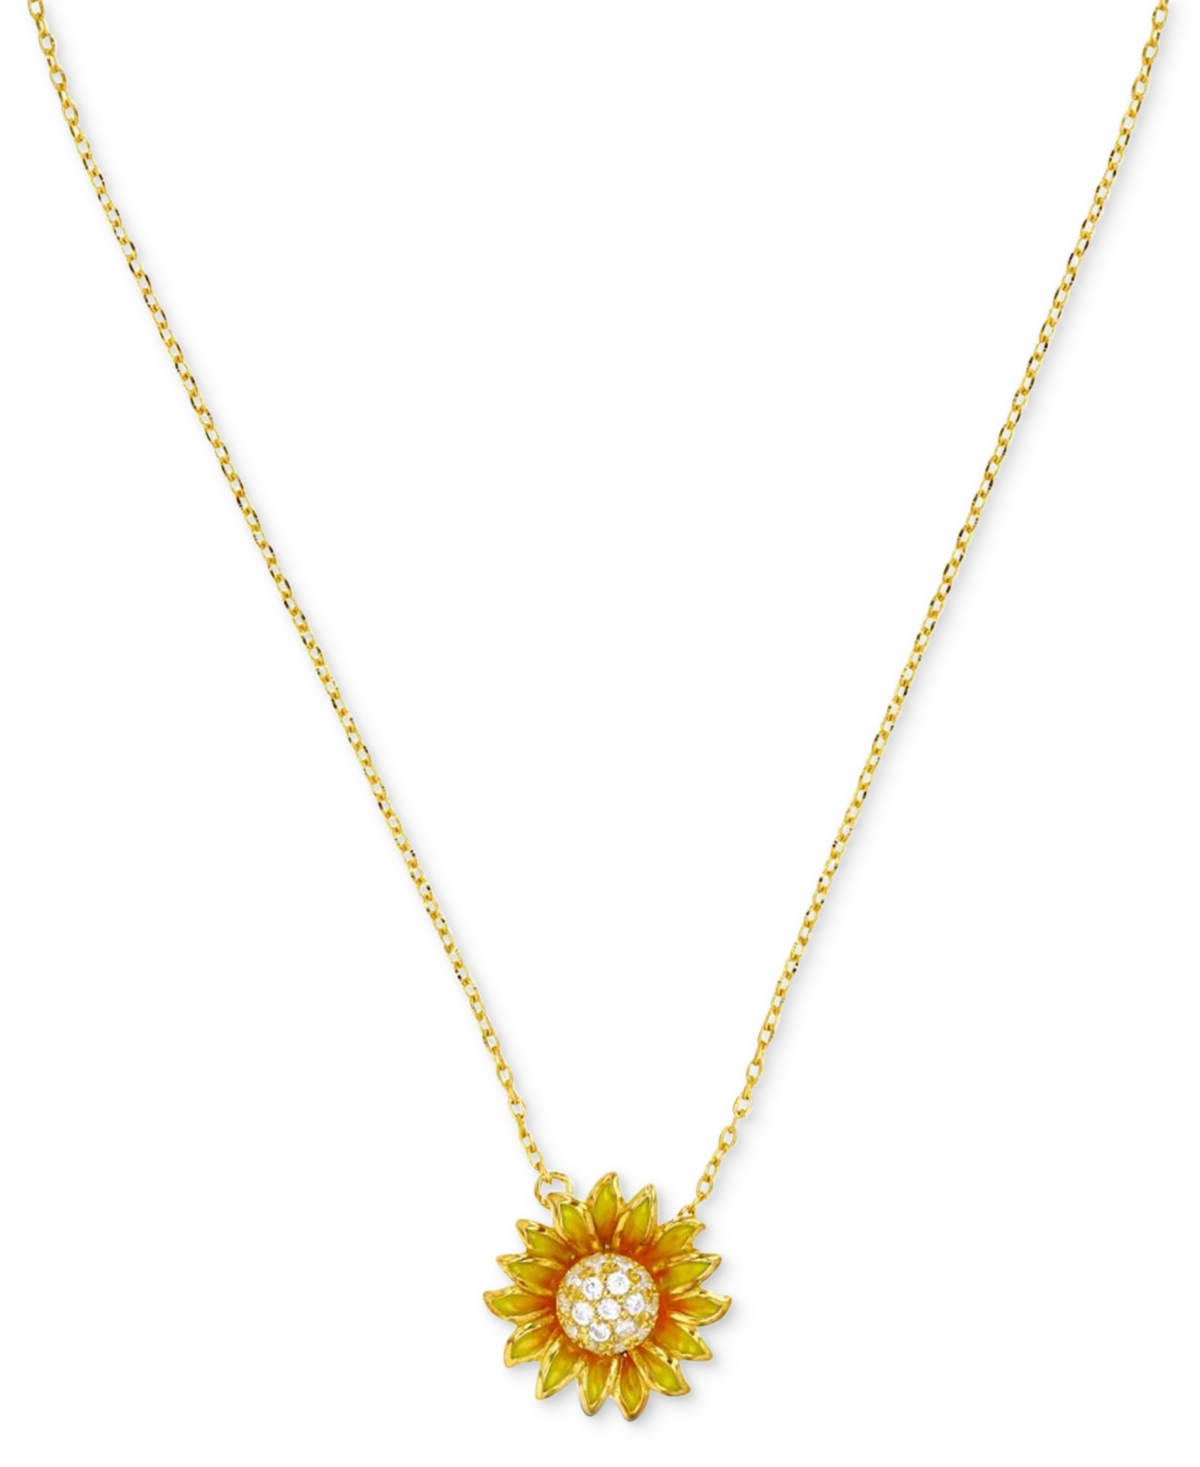 Cubic Zirconia Sunflower Pendant Necklace in 14k Gold-Plated Sterling Silver, 16" +2" extender - Gold